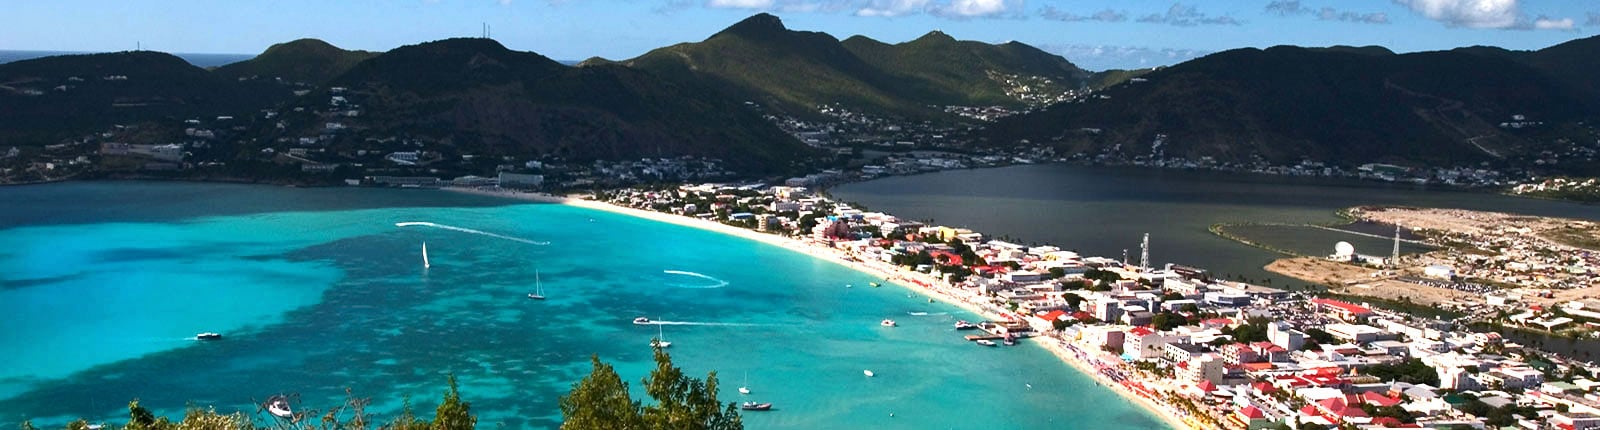 Aerial view of St. Maarten coastal town and mountains